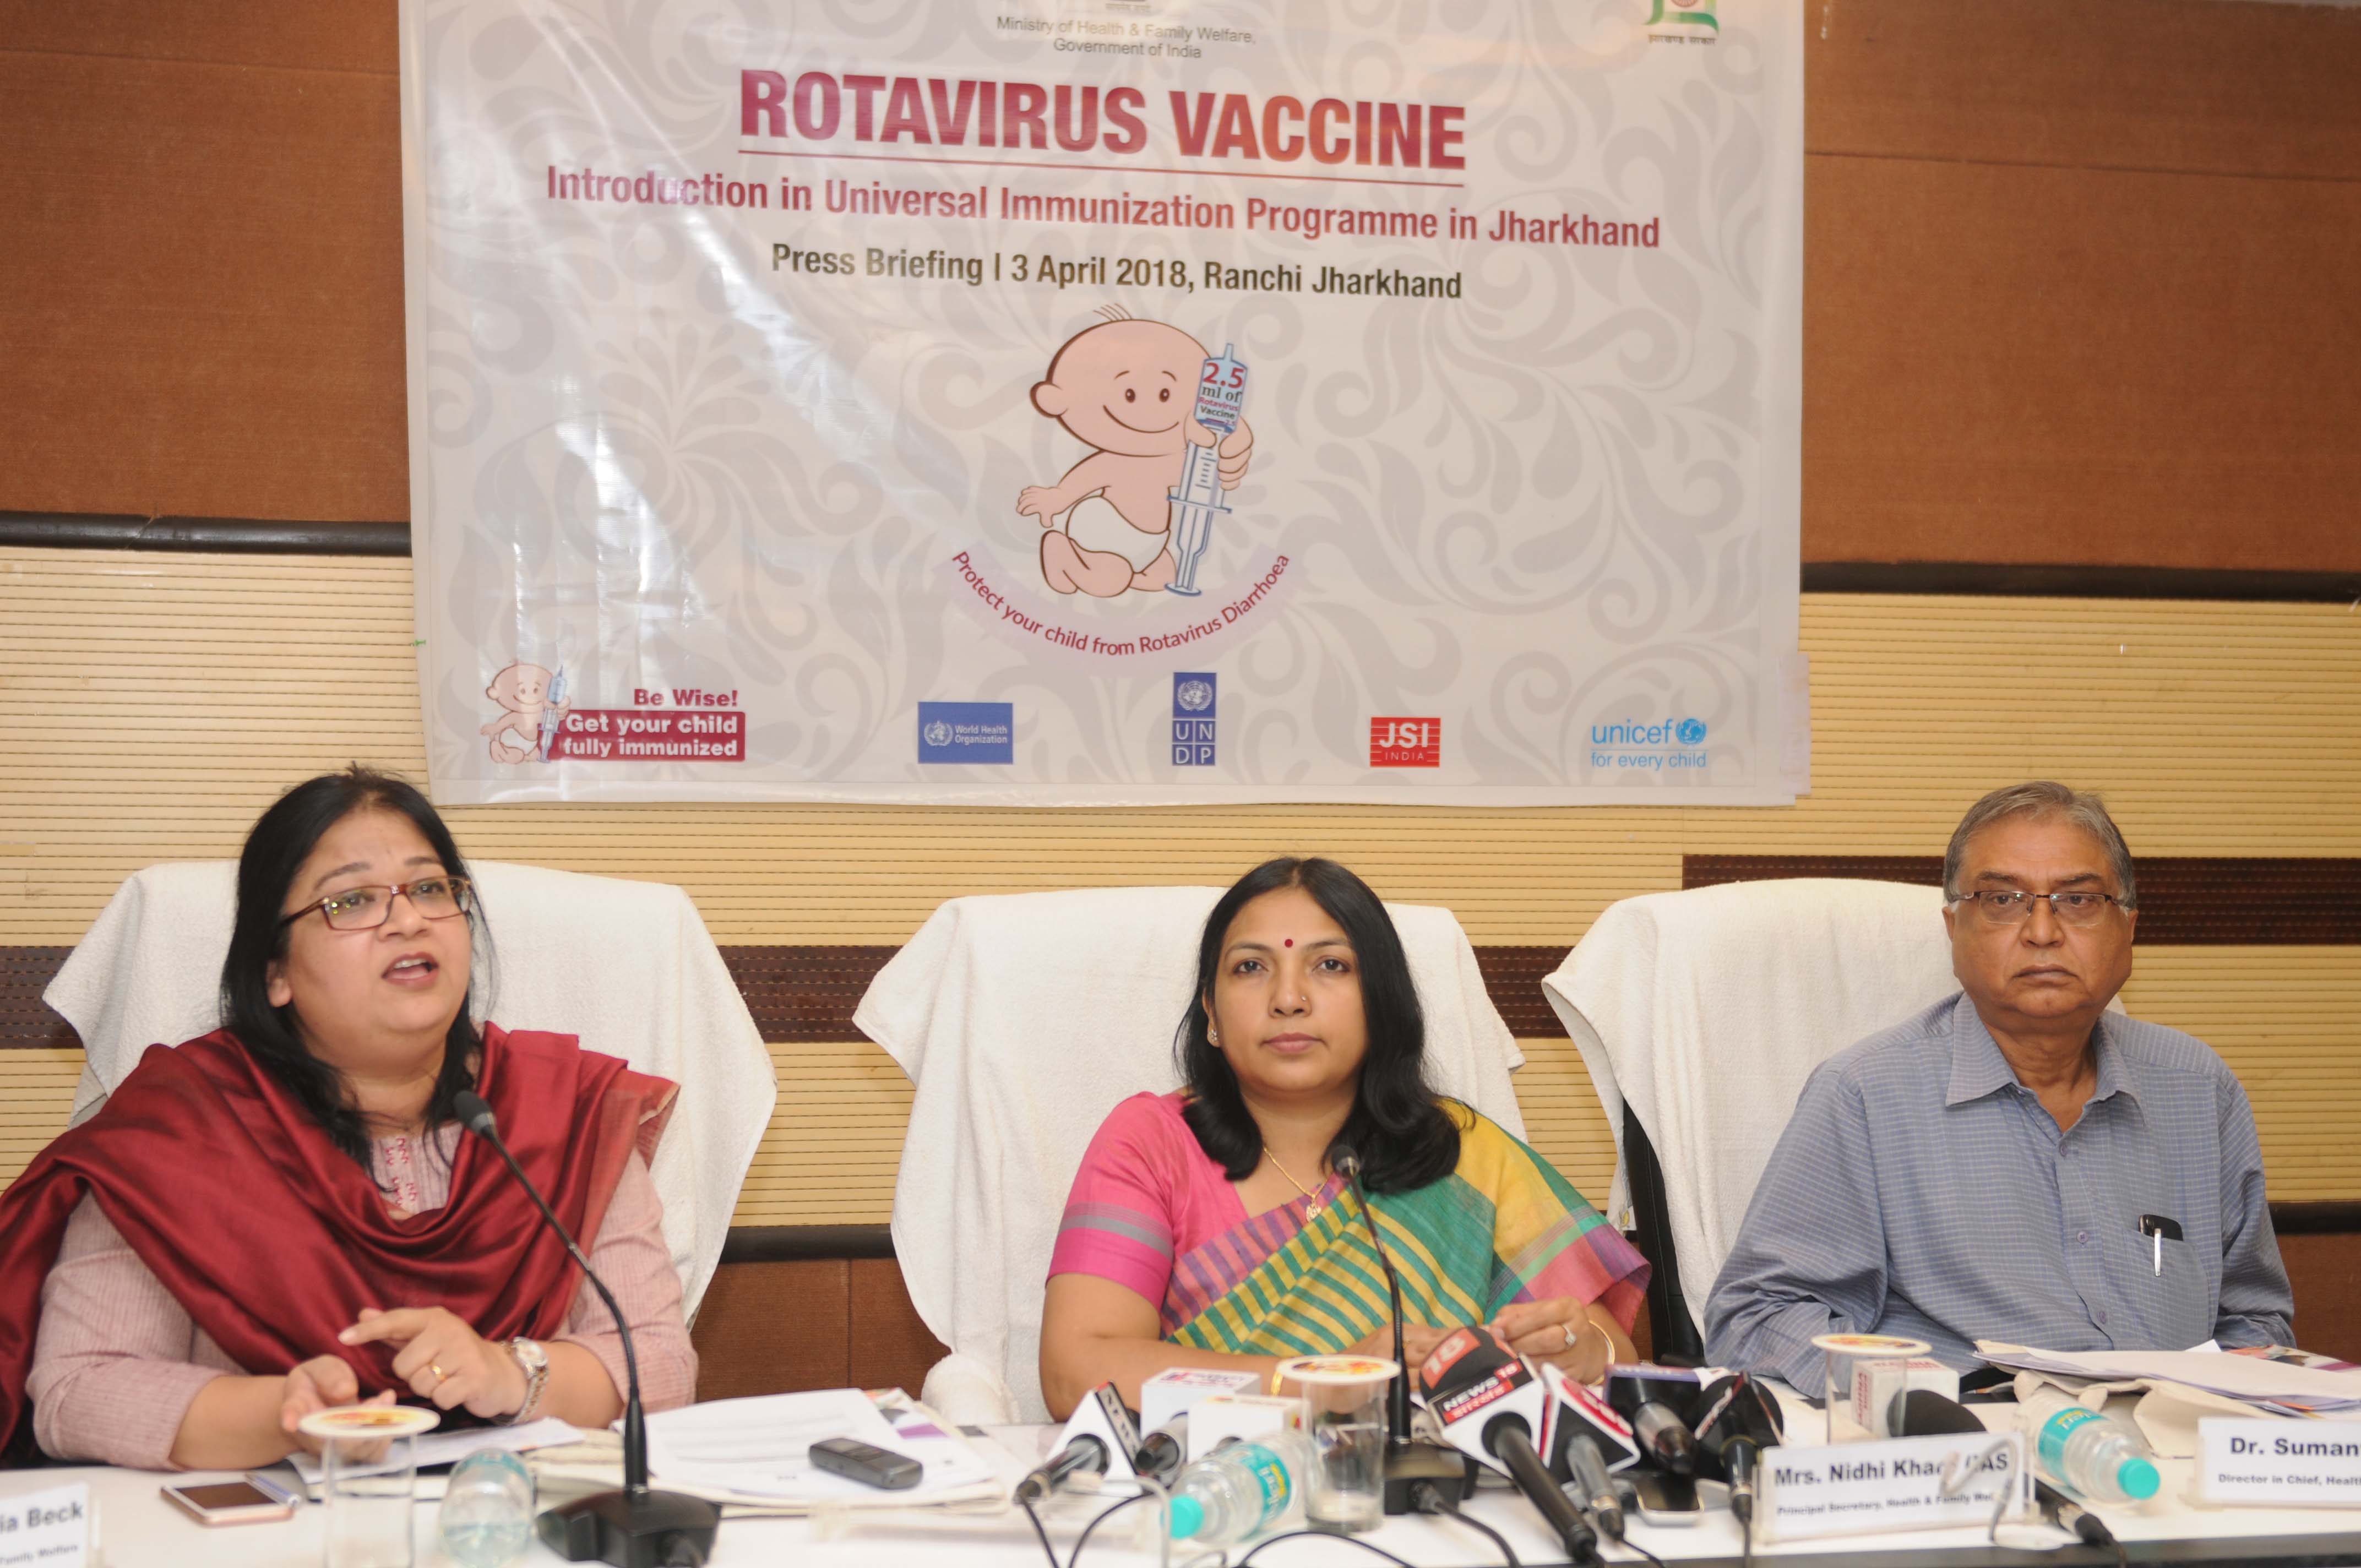 Infants to get Rotavirus vaccine from April 7th onwards